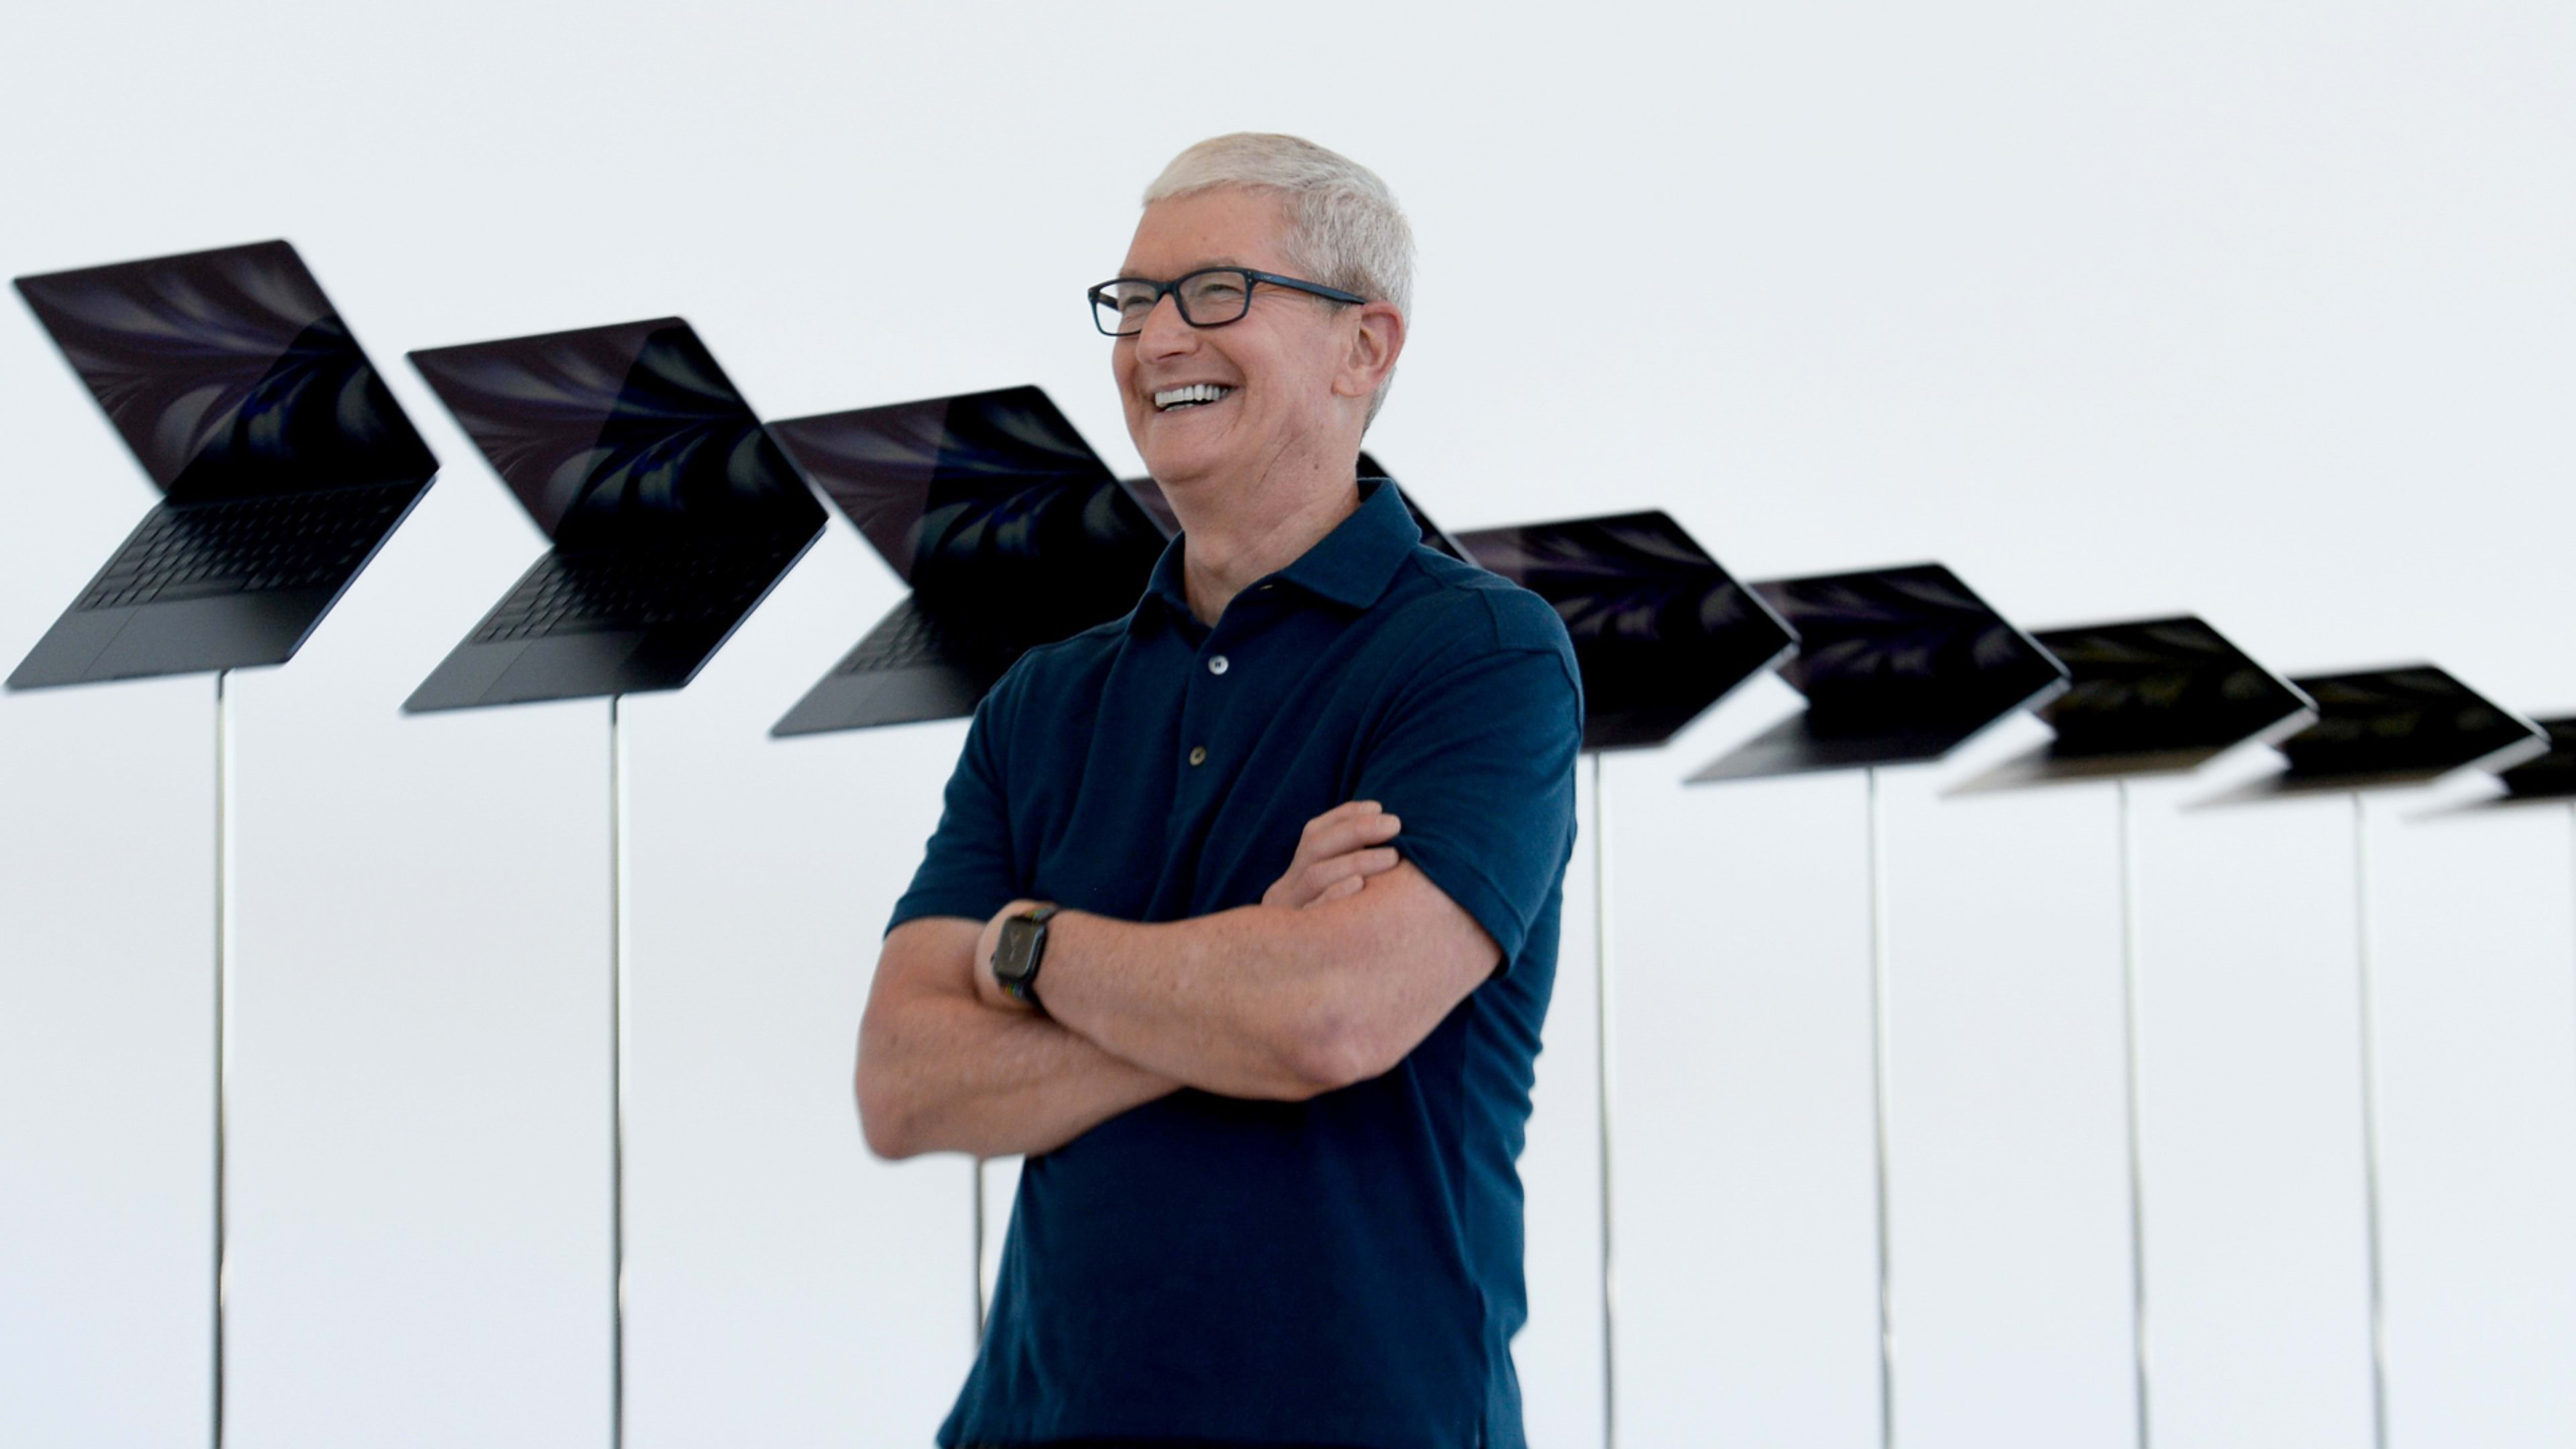 At WWDC, Apple finally turned all its devices into one big platform